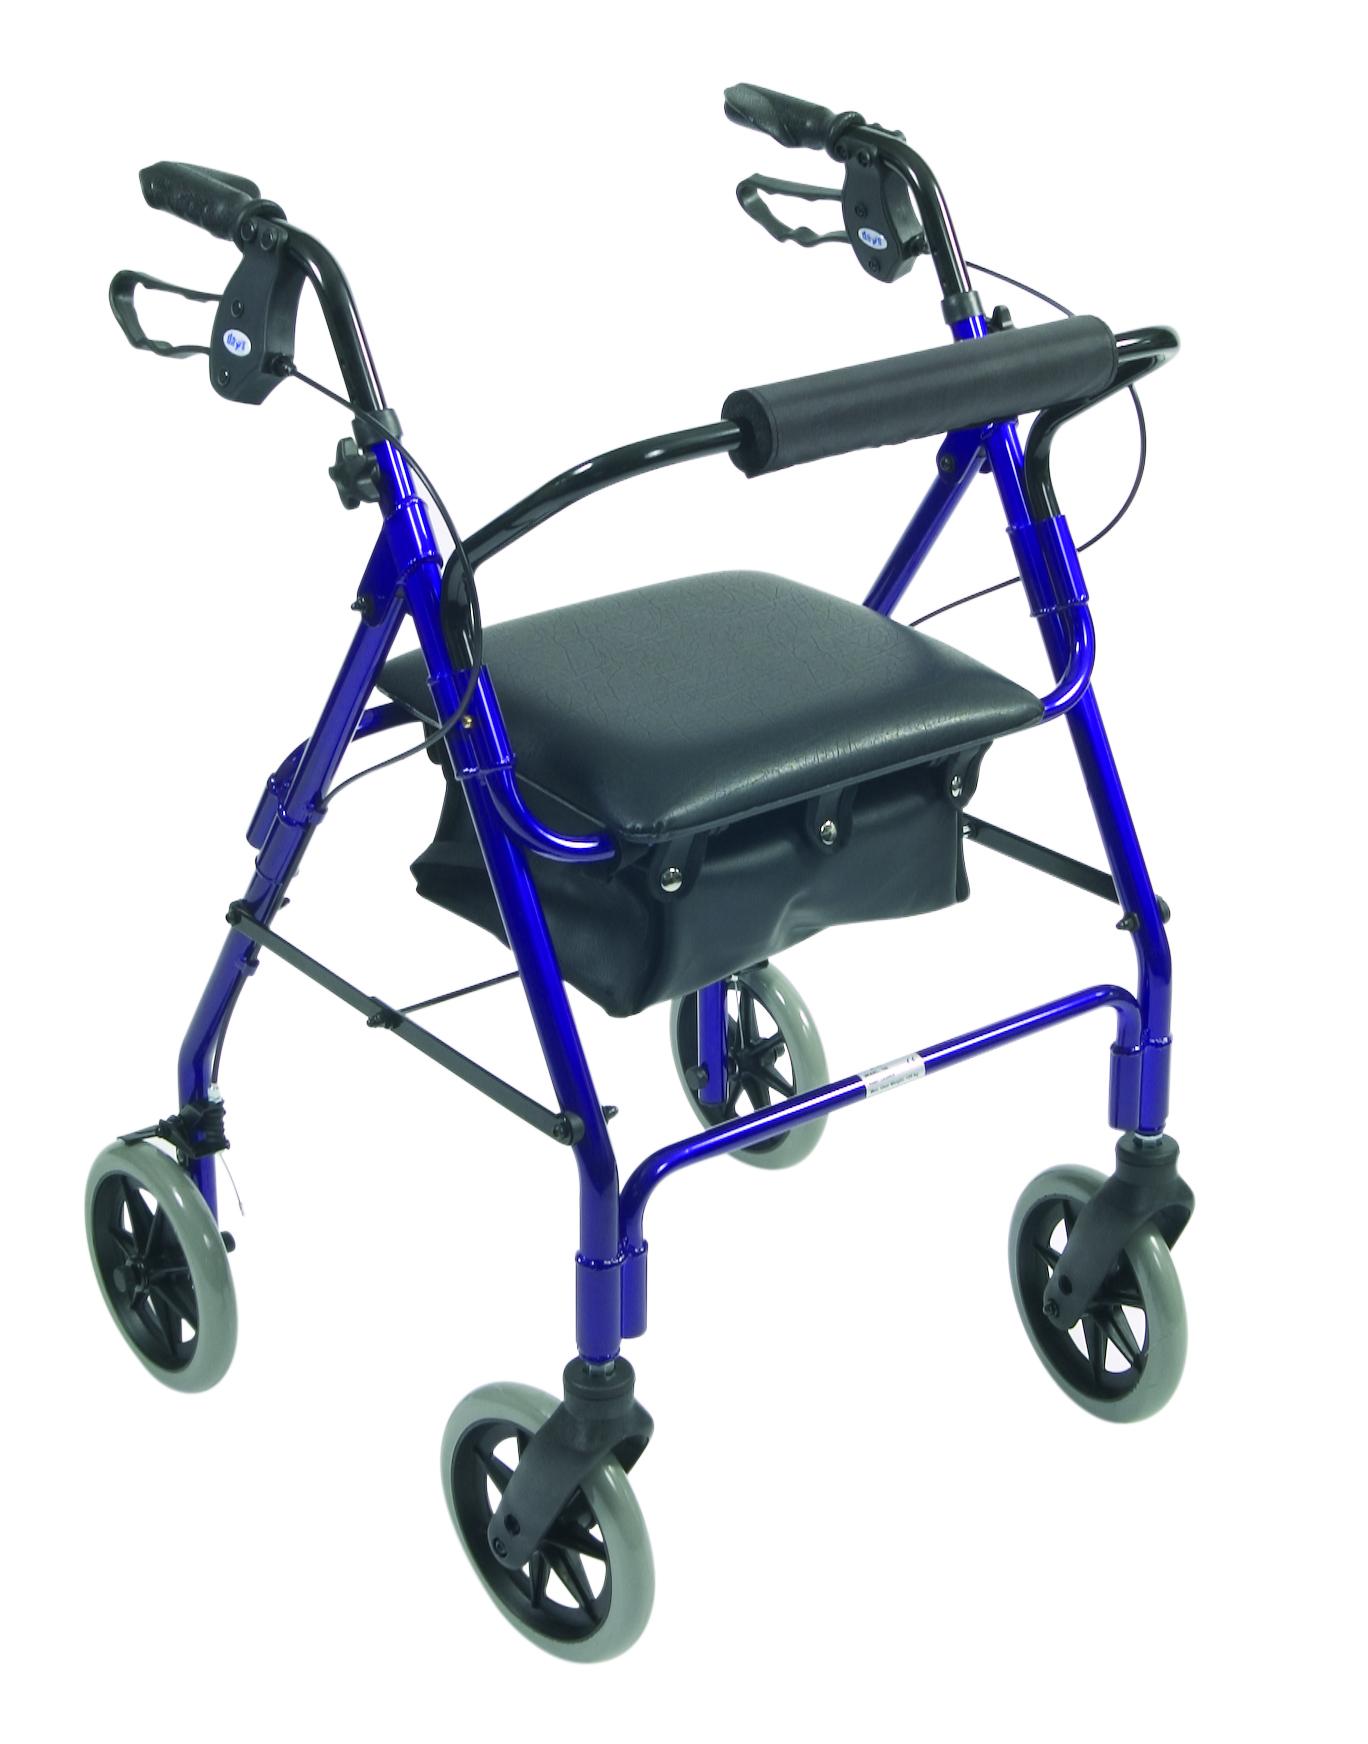 Lightweight Safety Mobility Walkers (Blue)